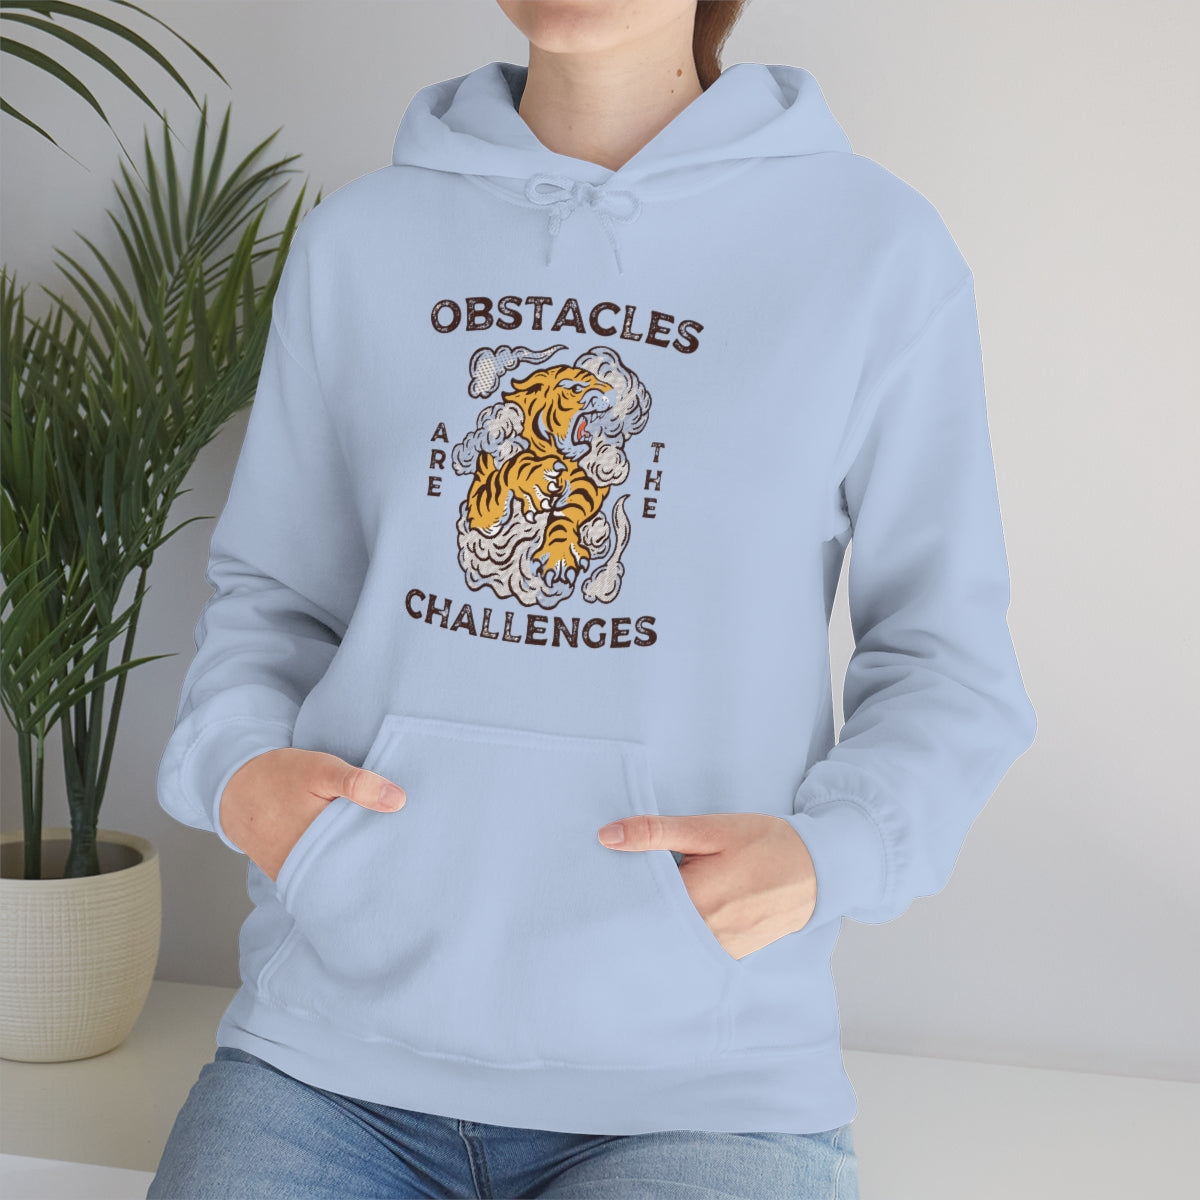 Obstacles Are the Challenge